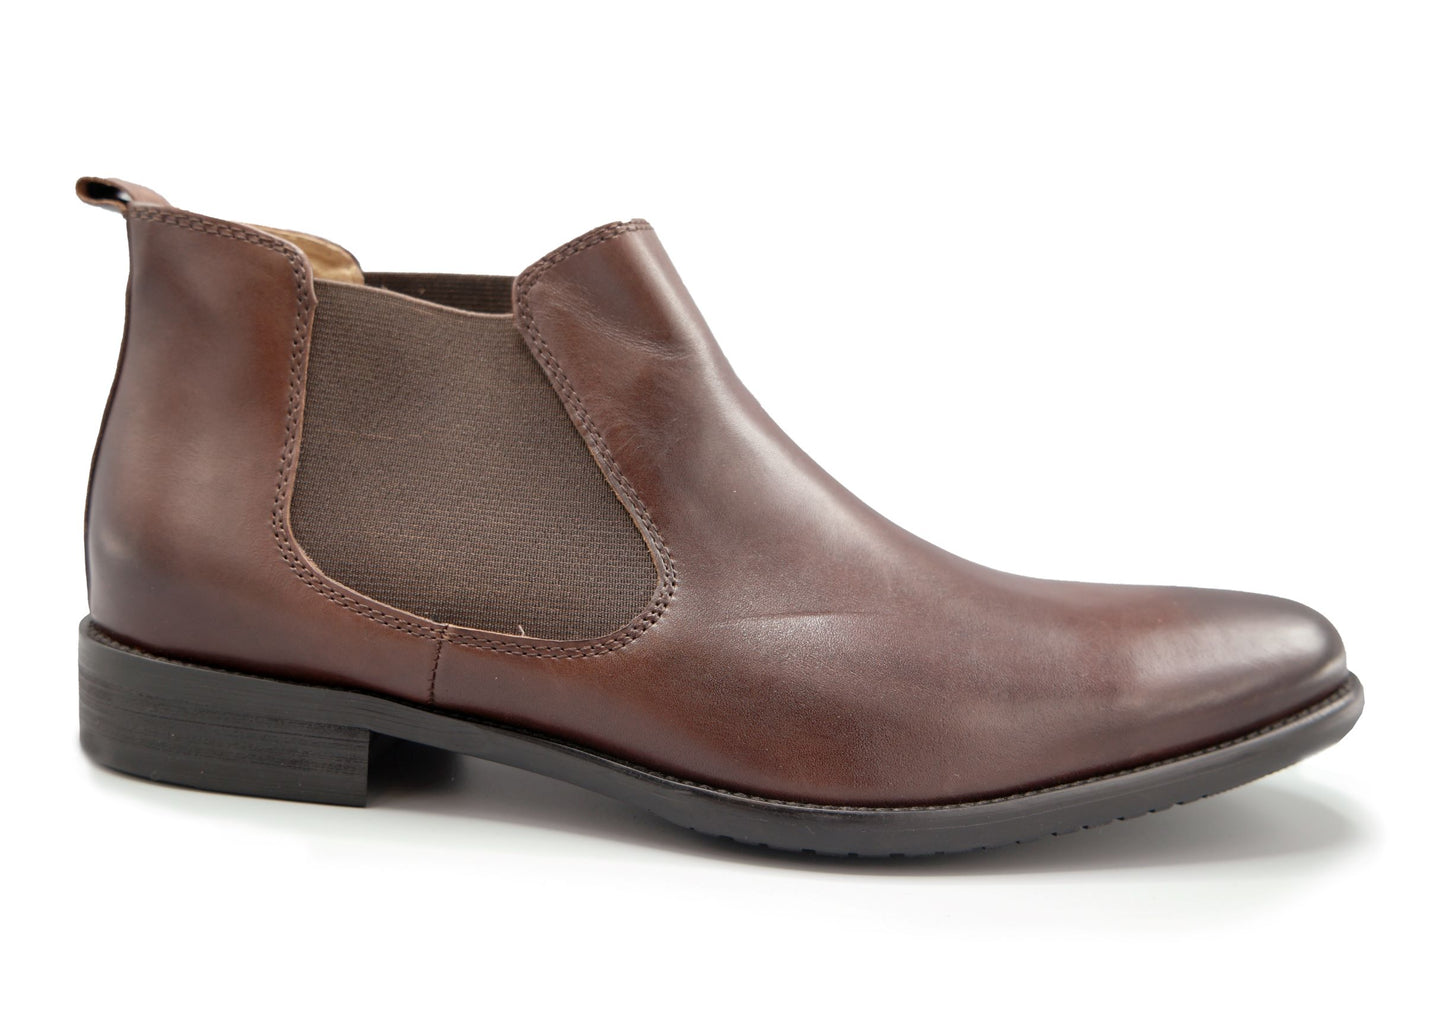 Cutler & Co - Anthony Boot